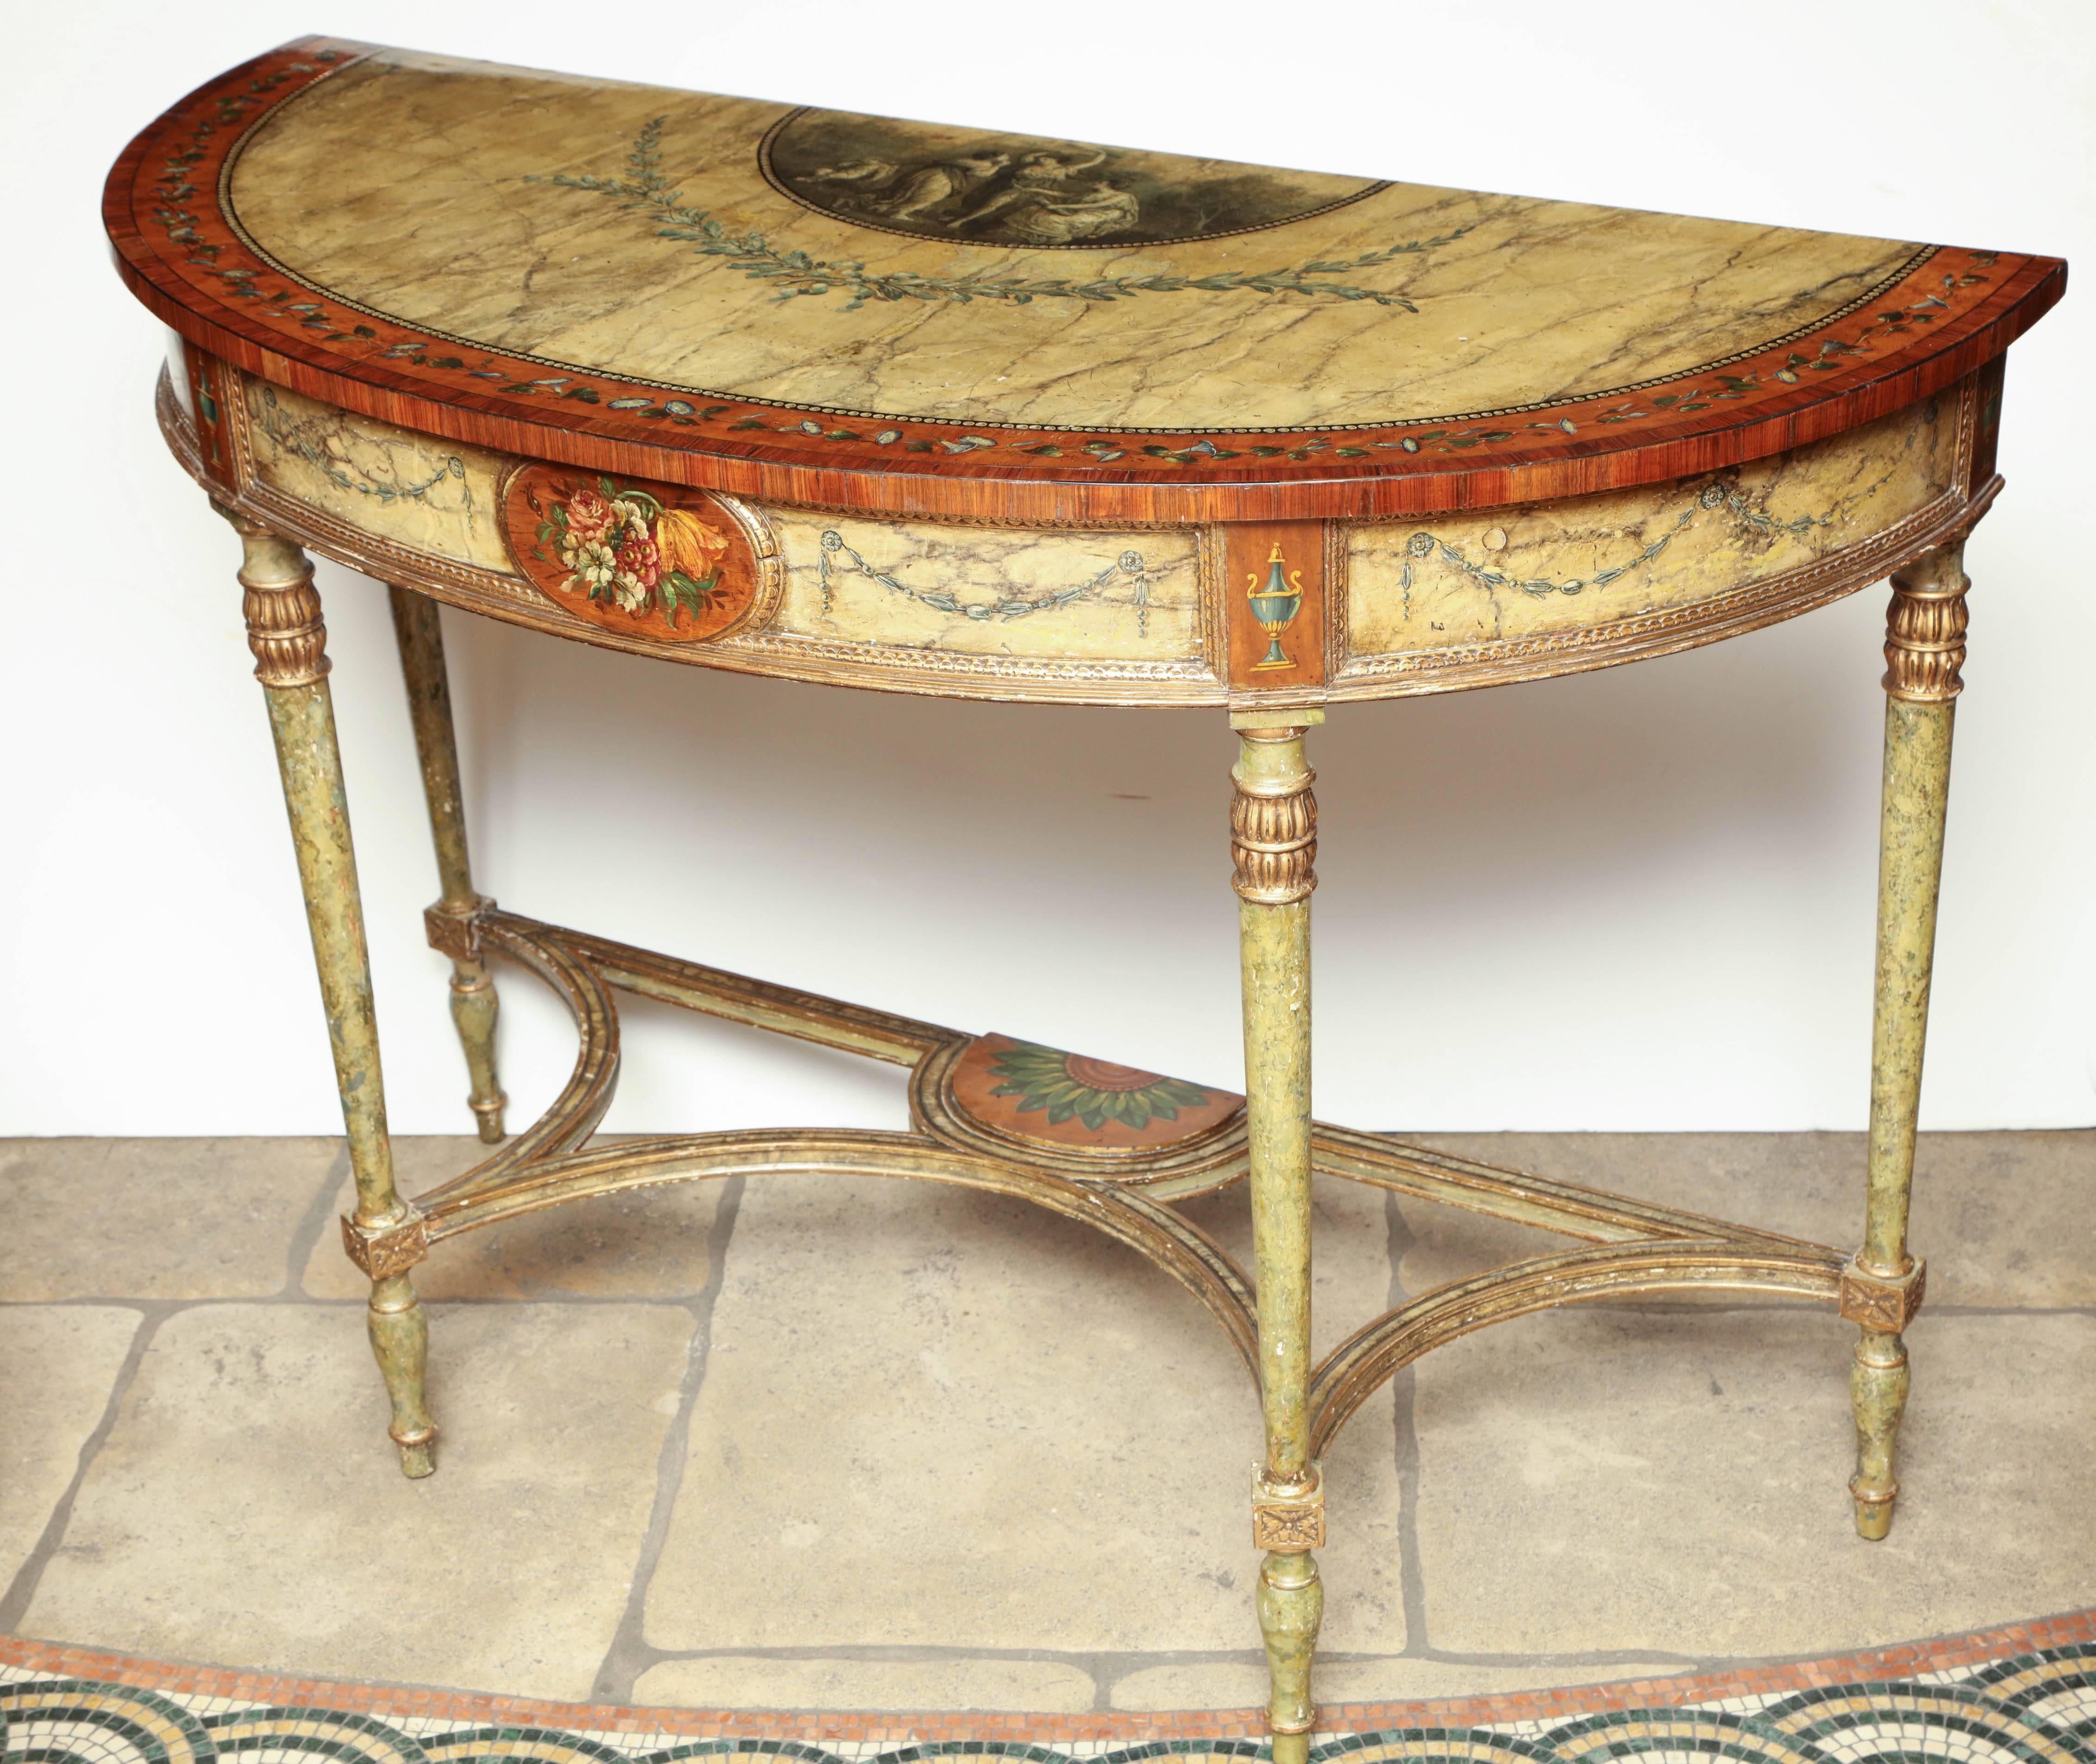 A fine George III painted demilune console with faux marble decoration and stenciled scenes.